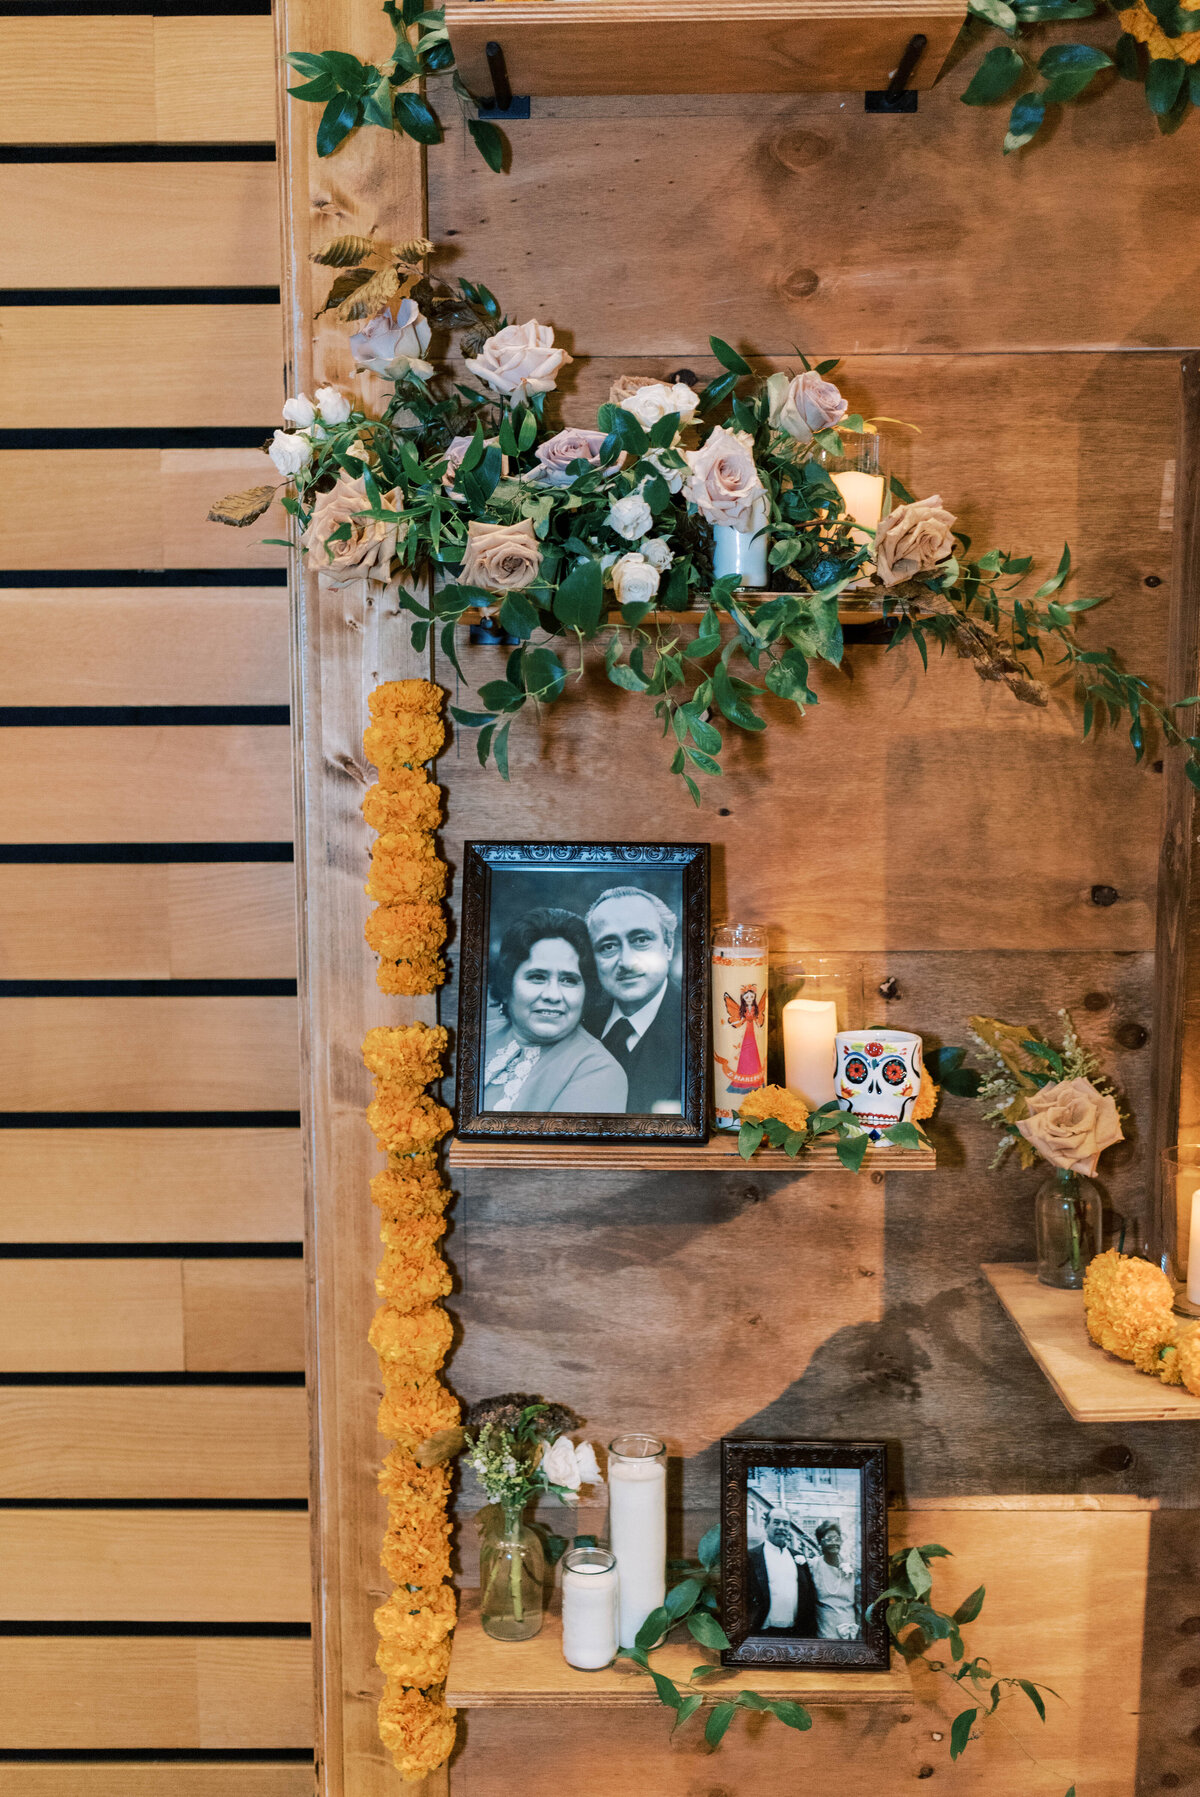 Wedding reception wooden backdrop displaying black and white framed photographs and flowers and greenery